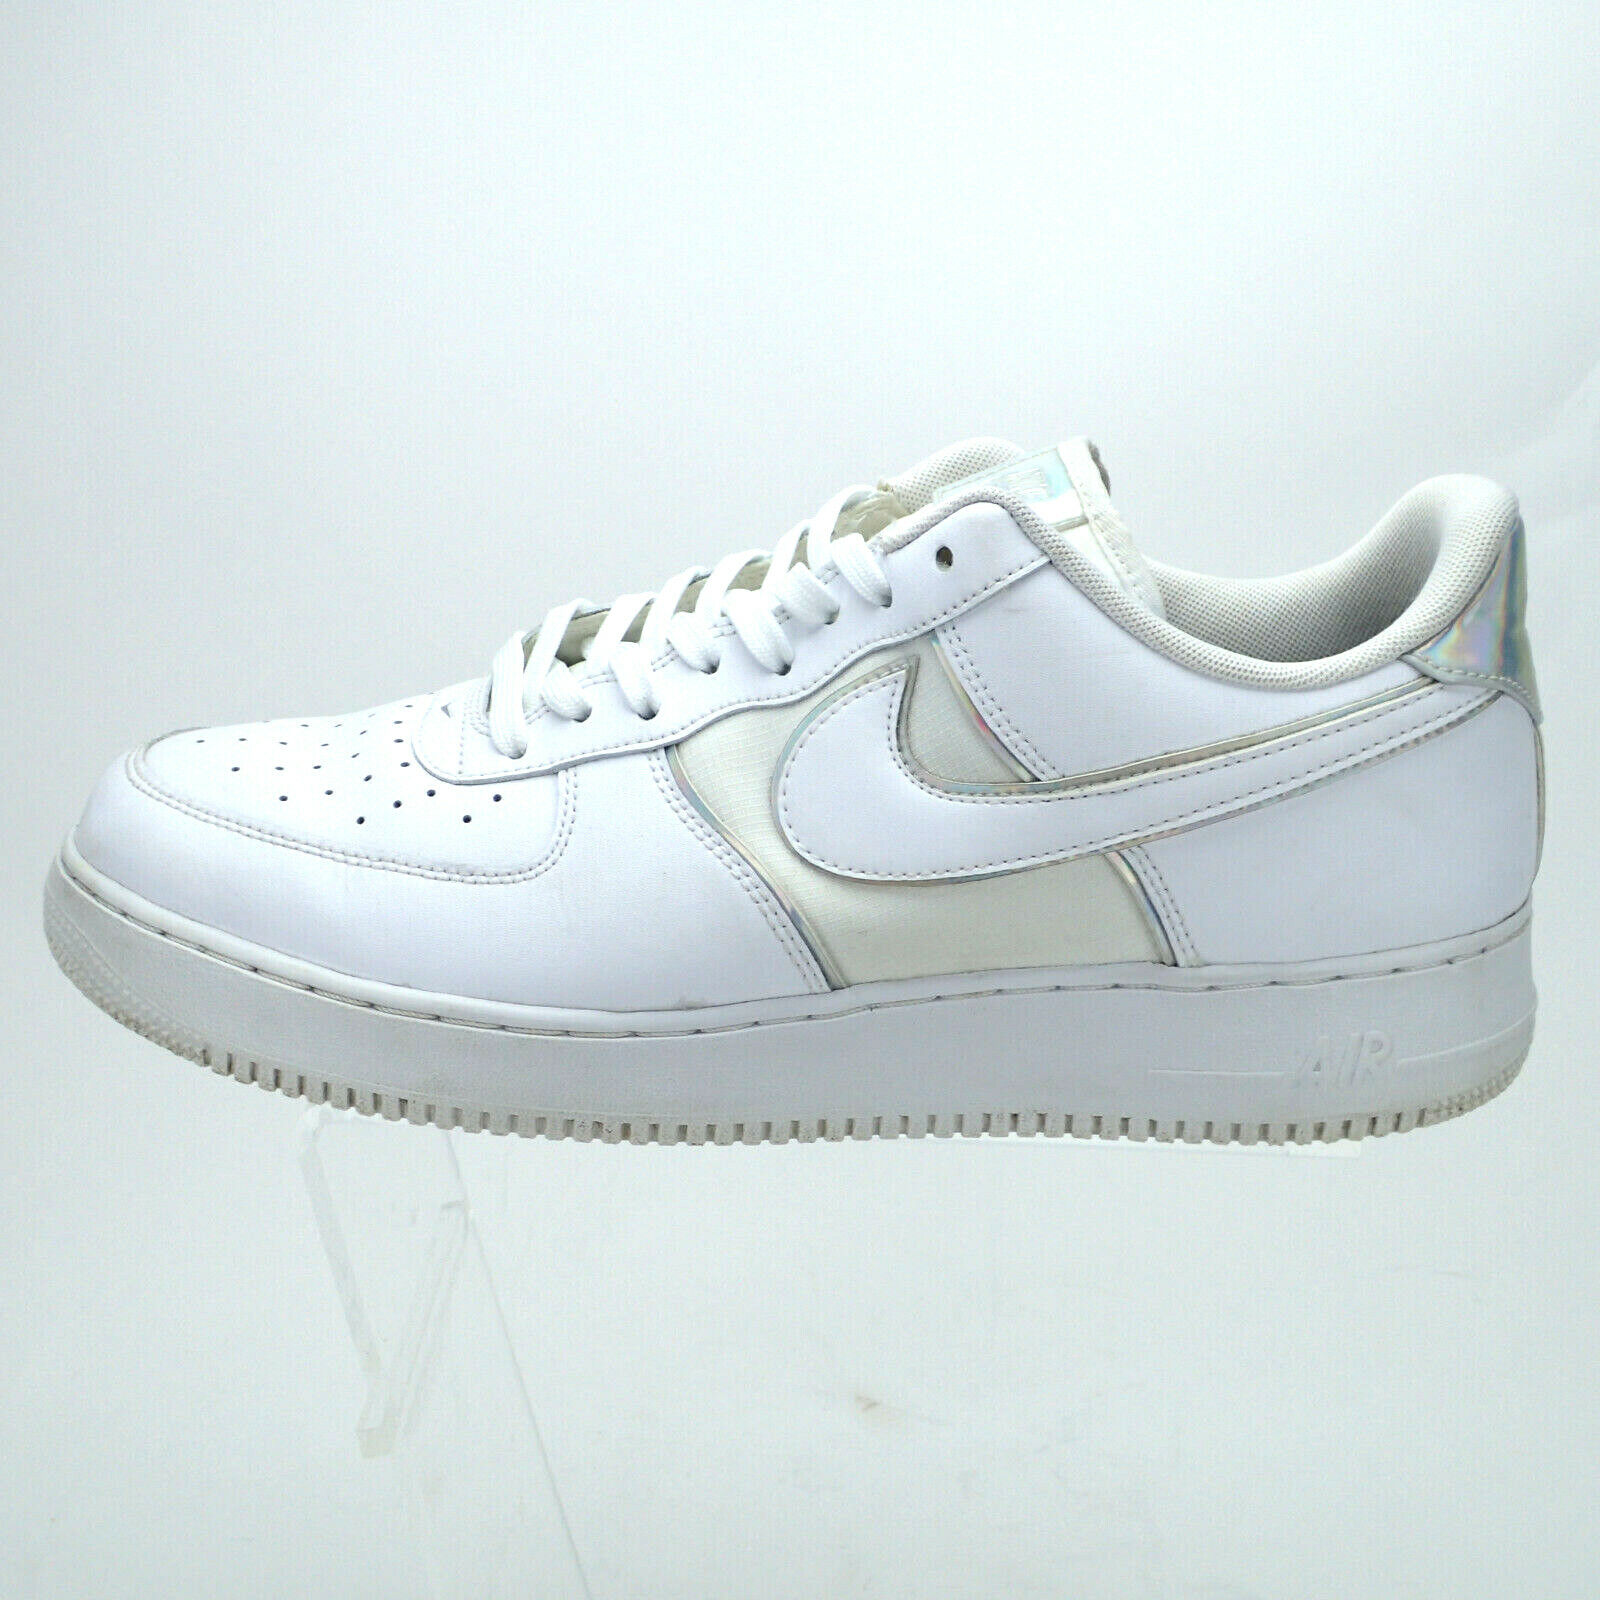 Nike Air Force 1 07 LV8 White Iridescent Silver AF1 AT6147-100 Men's Size 13